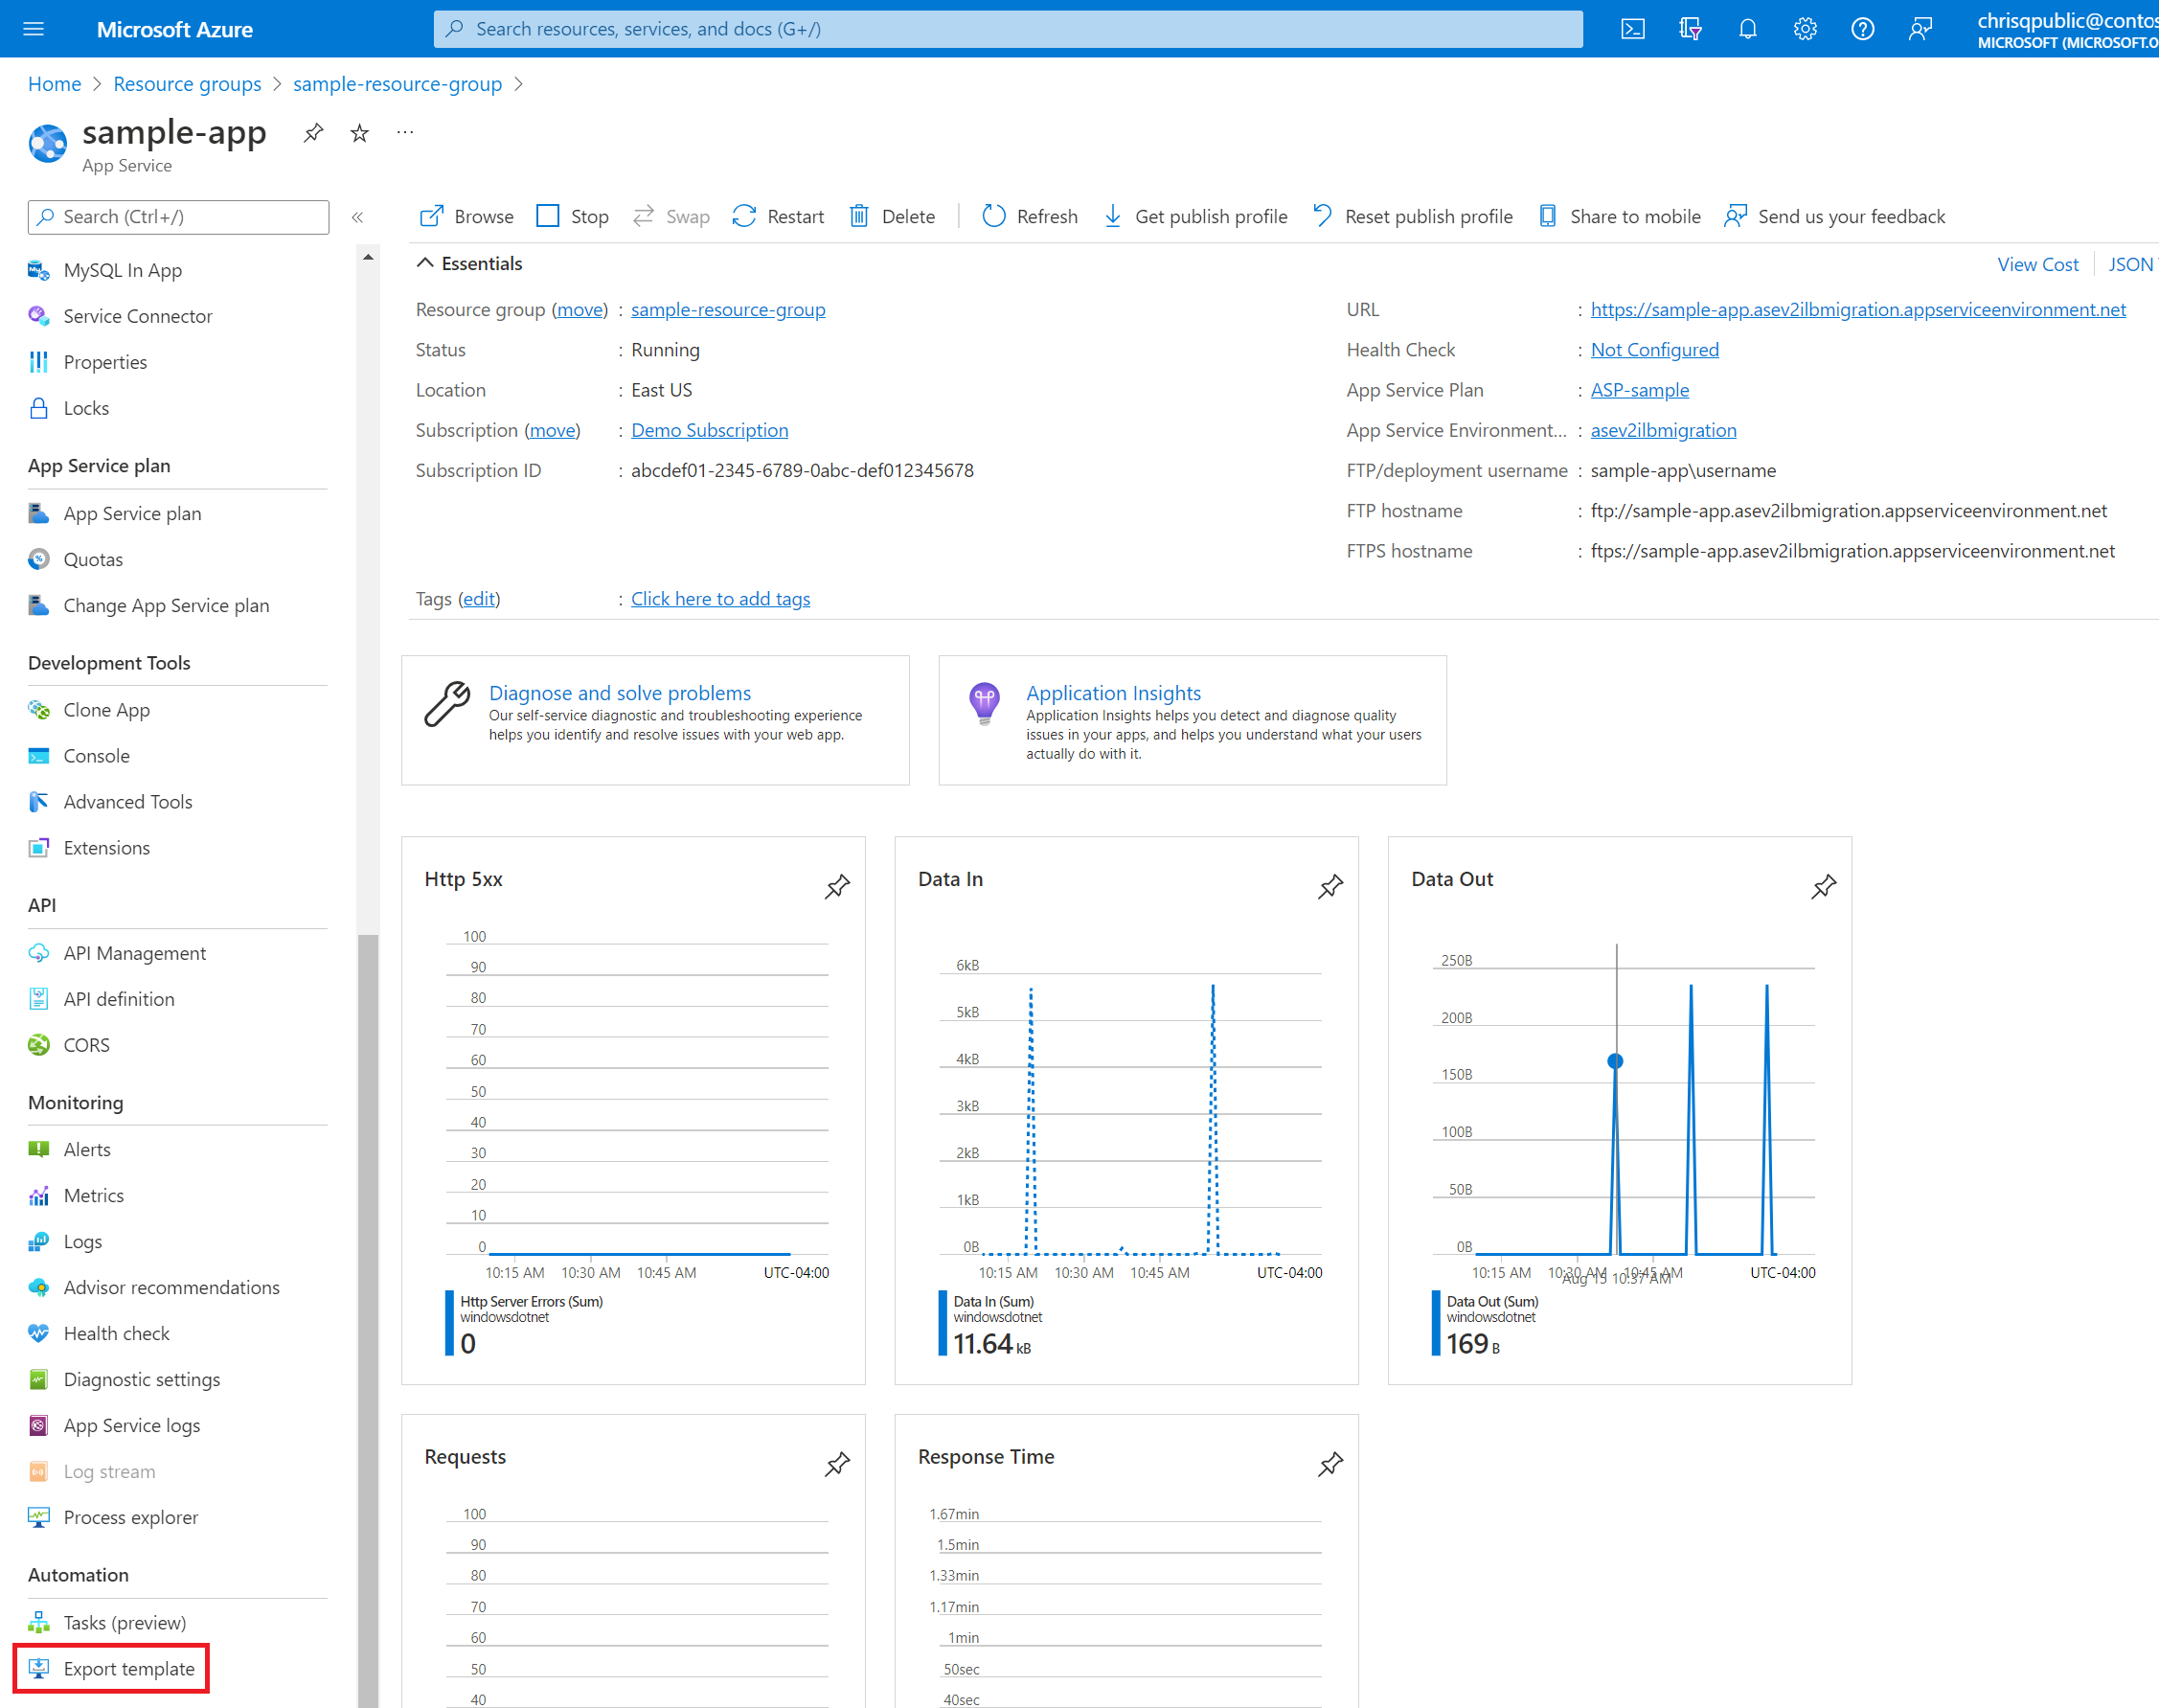 Screenshot of the option to export a template on the left pane of the Azure portal.